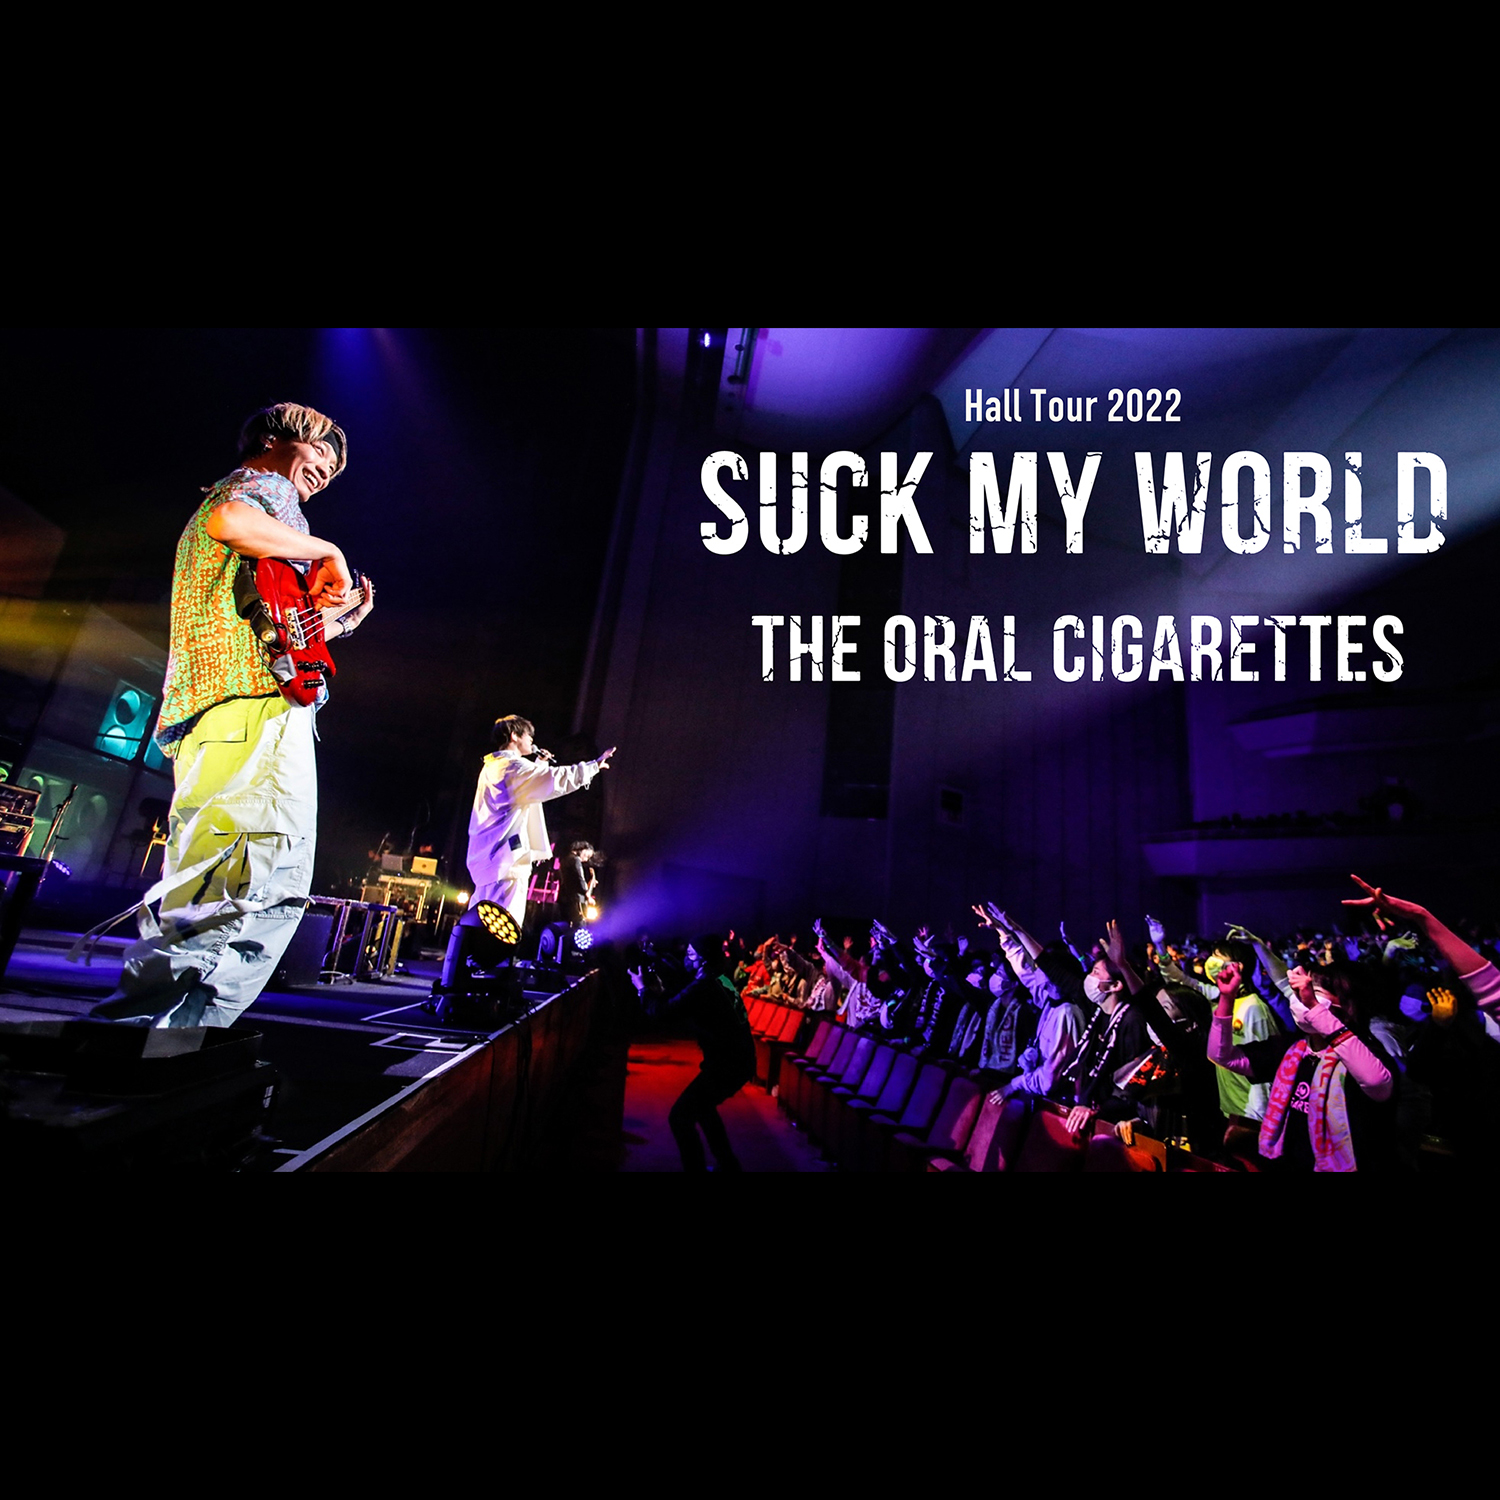 Hall Tour 2022「SUCK MY WORLD」福岡公演よりライブ映像公開｜THE ORAL CIGARETTES